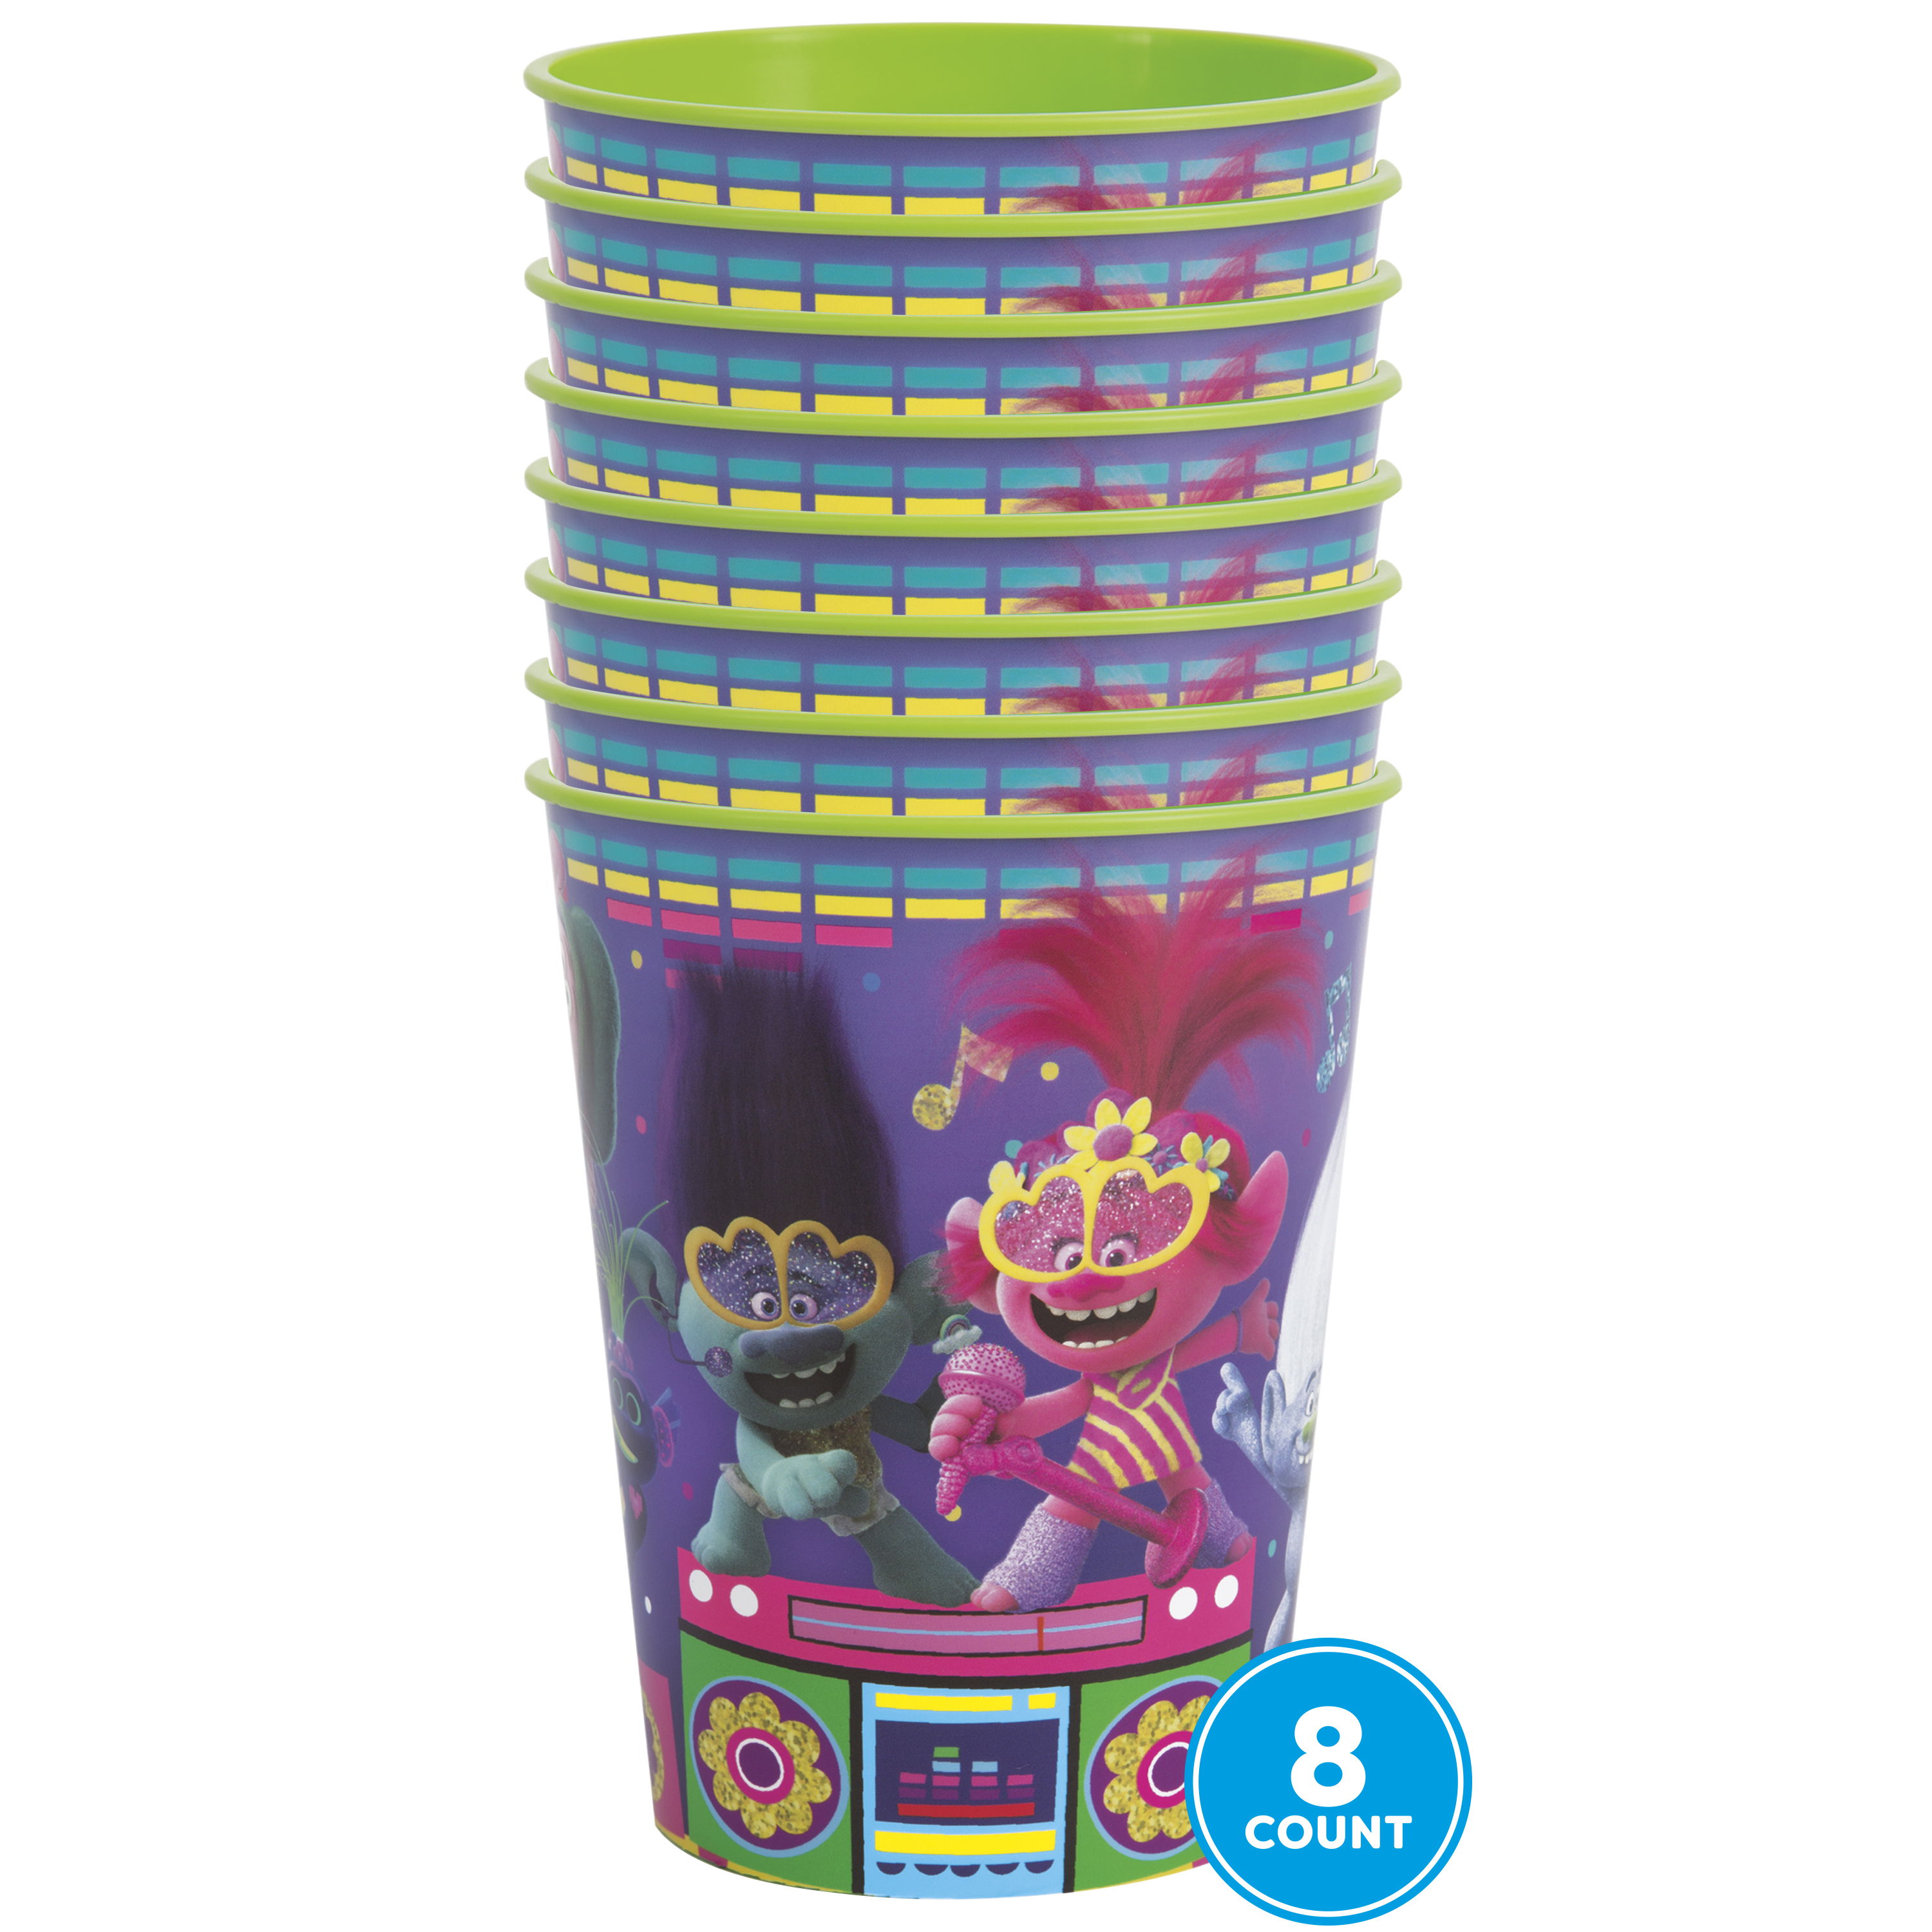 Officially Licensed 16 oz Unique 6 Count Superhero Party Cups Birthday Party Favors for Kids Tweens Girls 